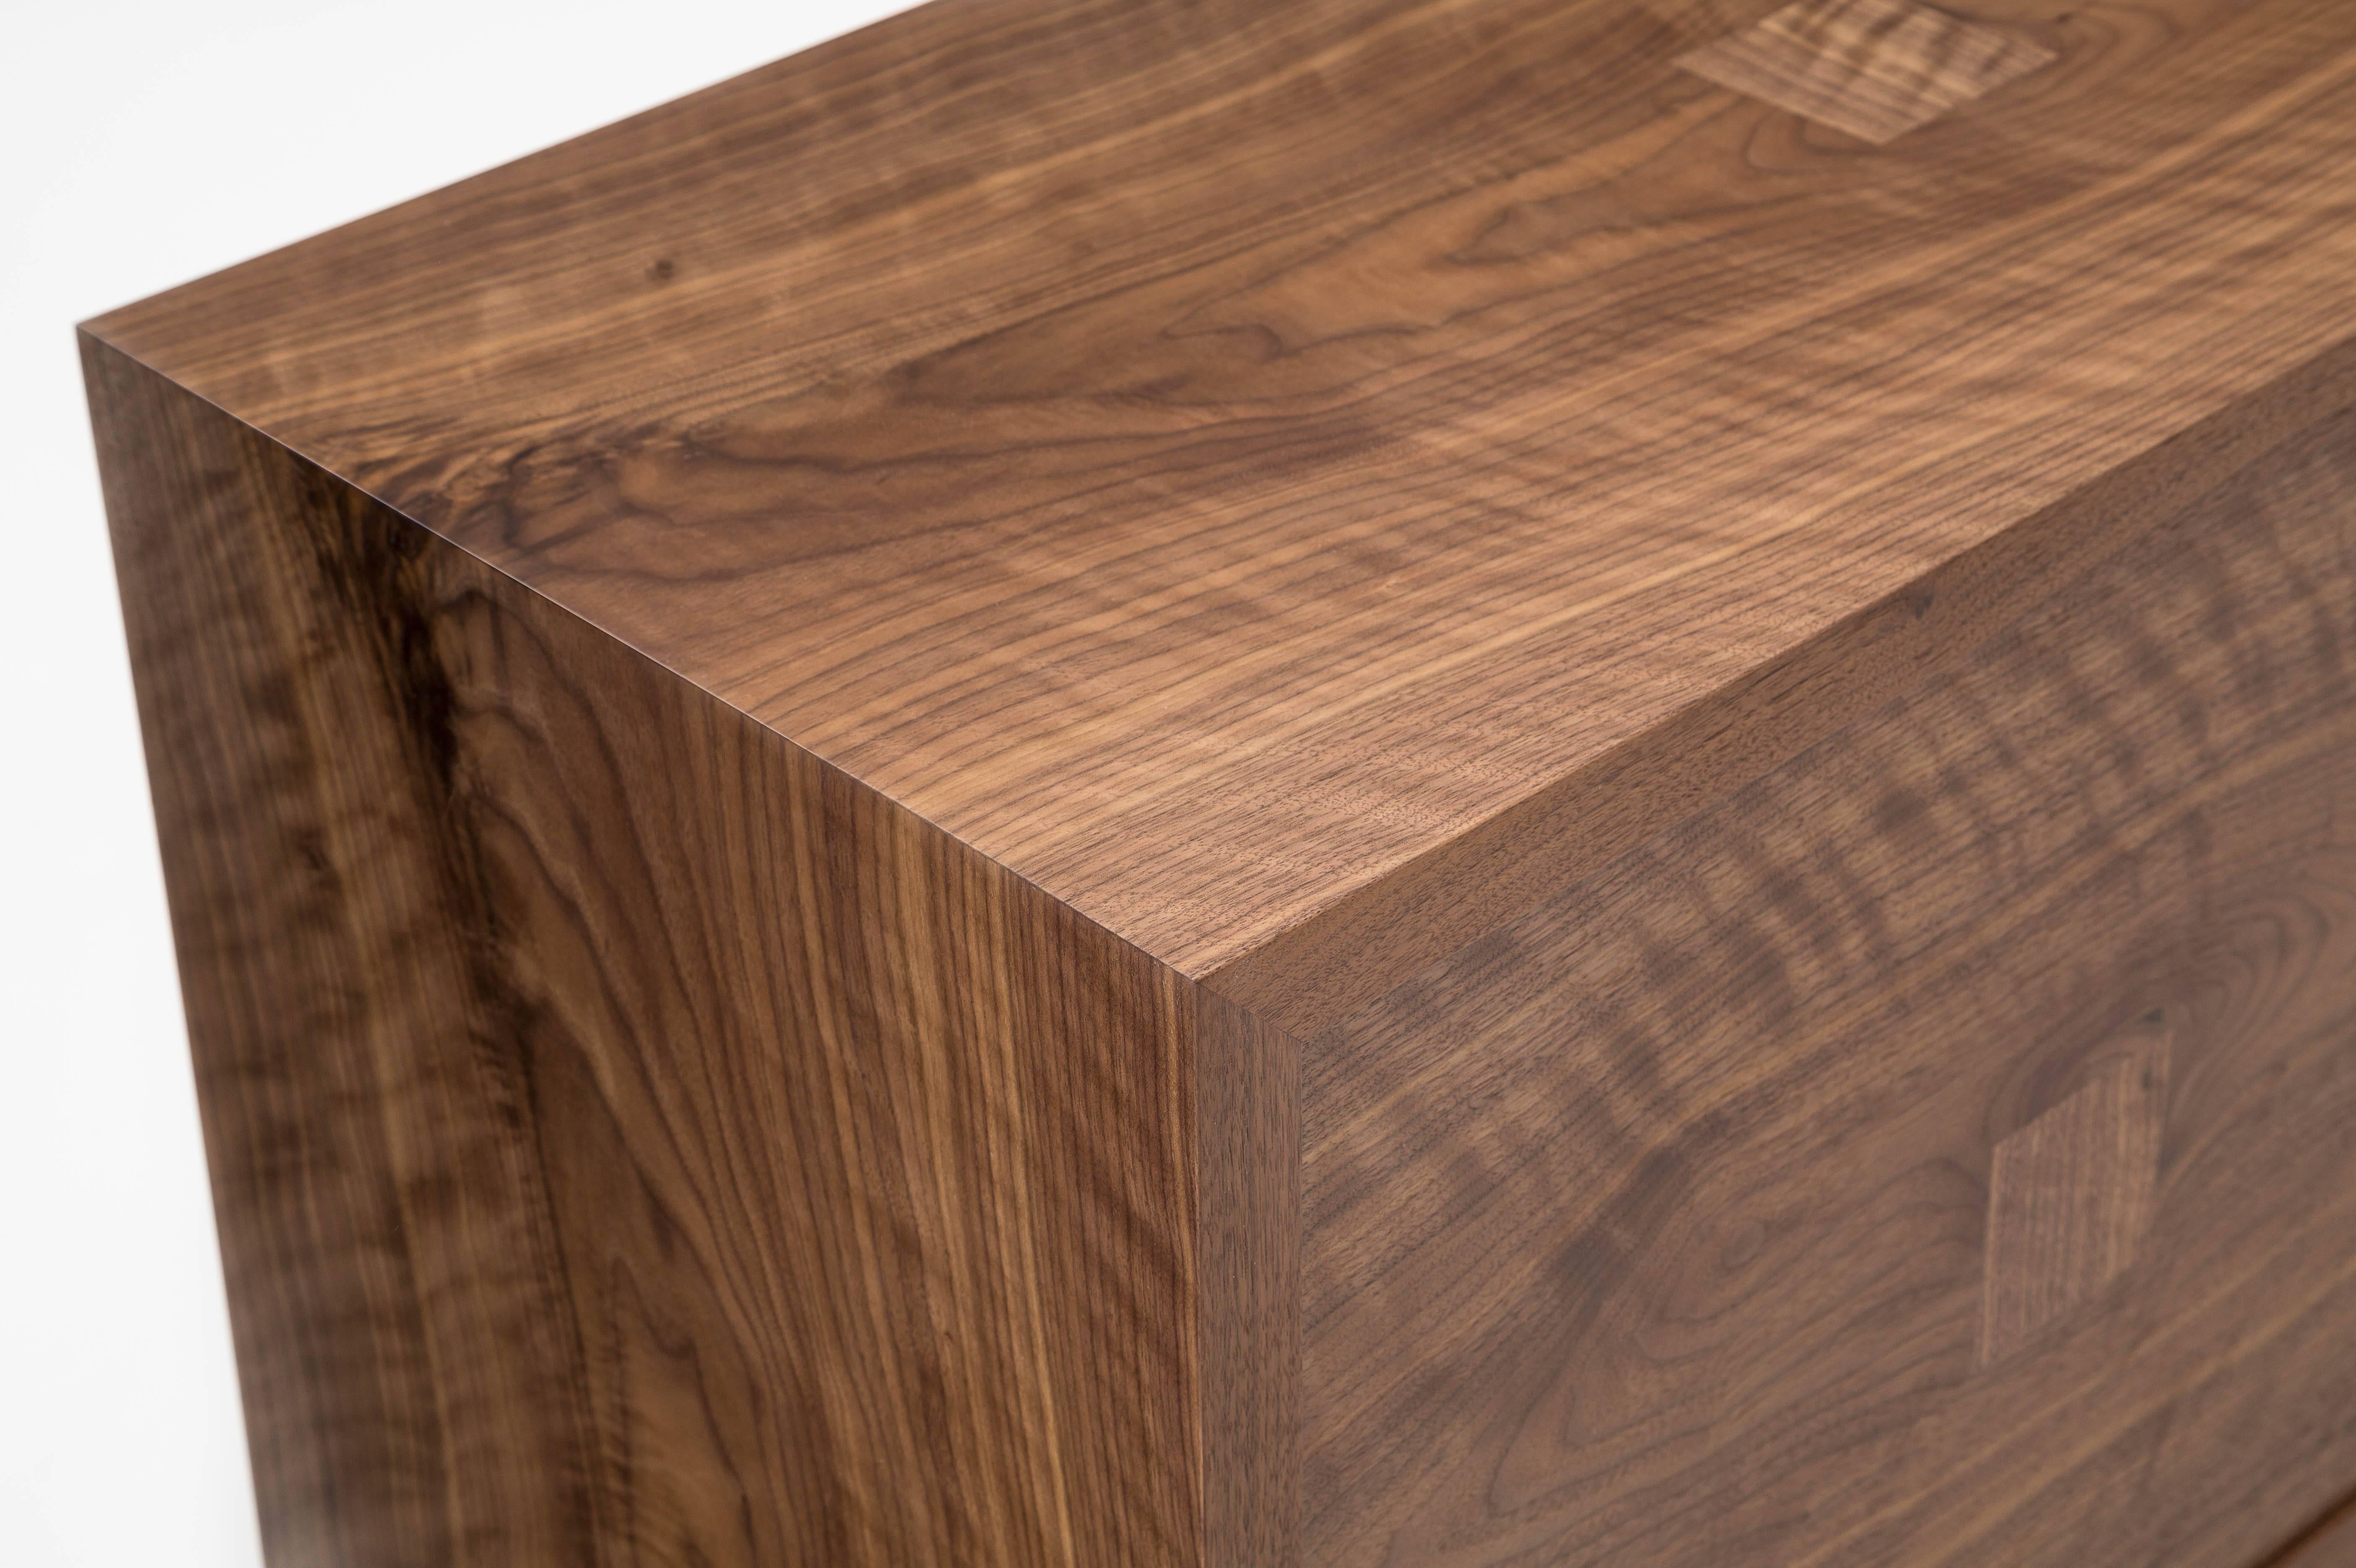 The Marvin credenza is built in our Brooklyn studio using premium hardwoods and thoughtfully selected wood veneers. The cabinet showcases wide, featured American walnut, with book-matched front doors and waterfall edges. The door pulls are custom